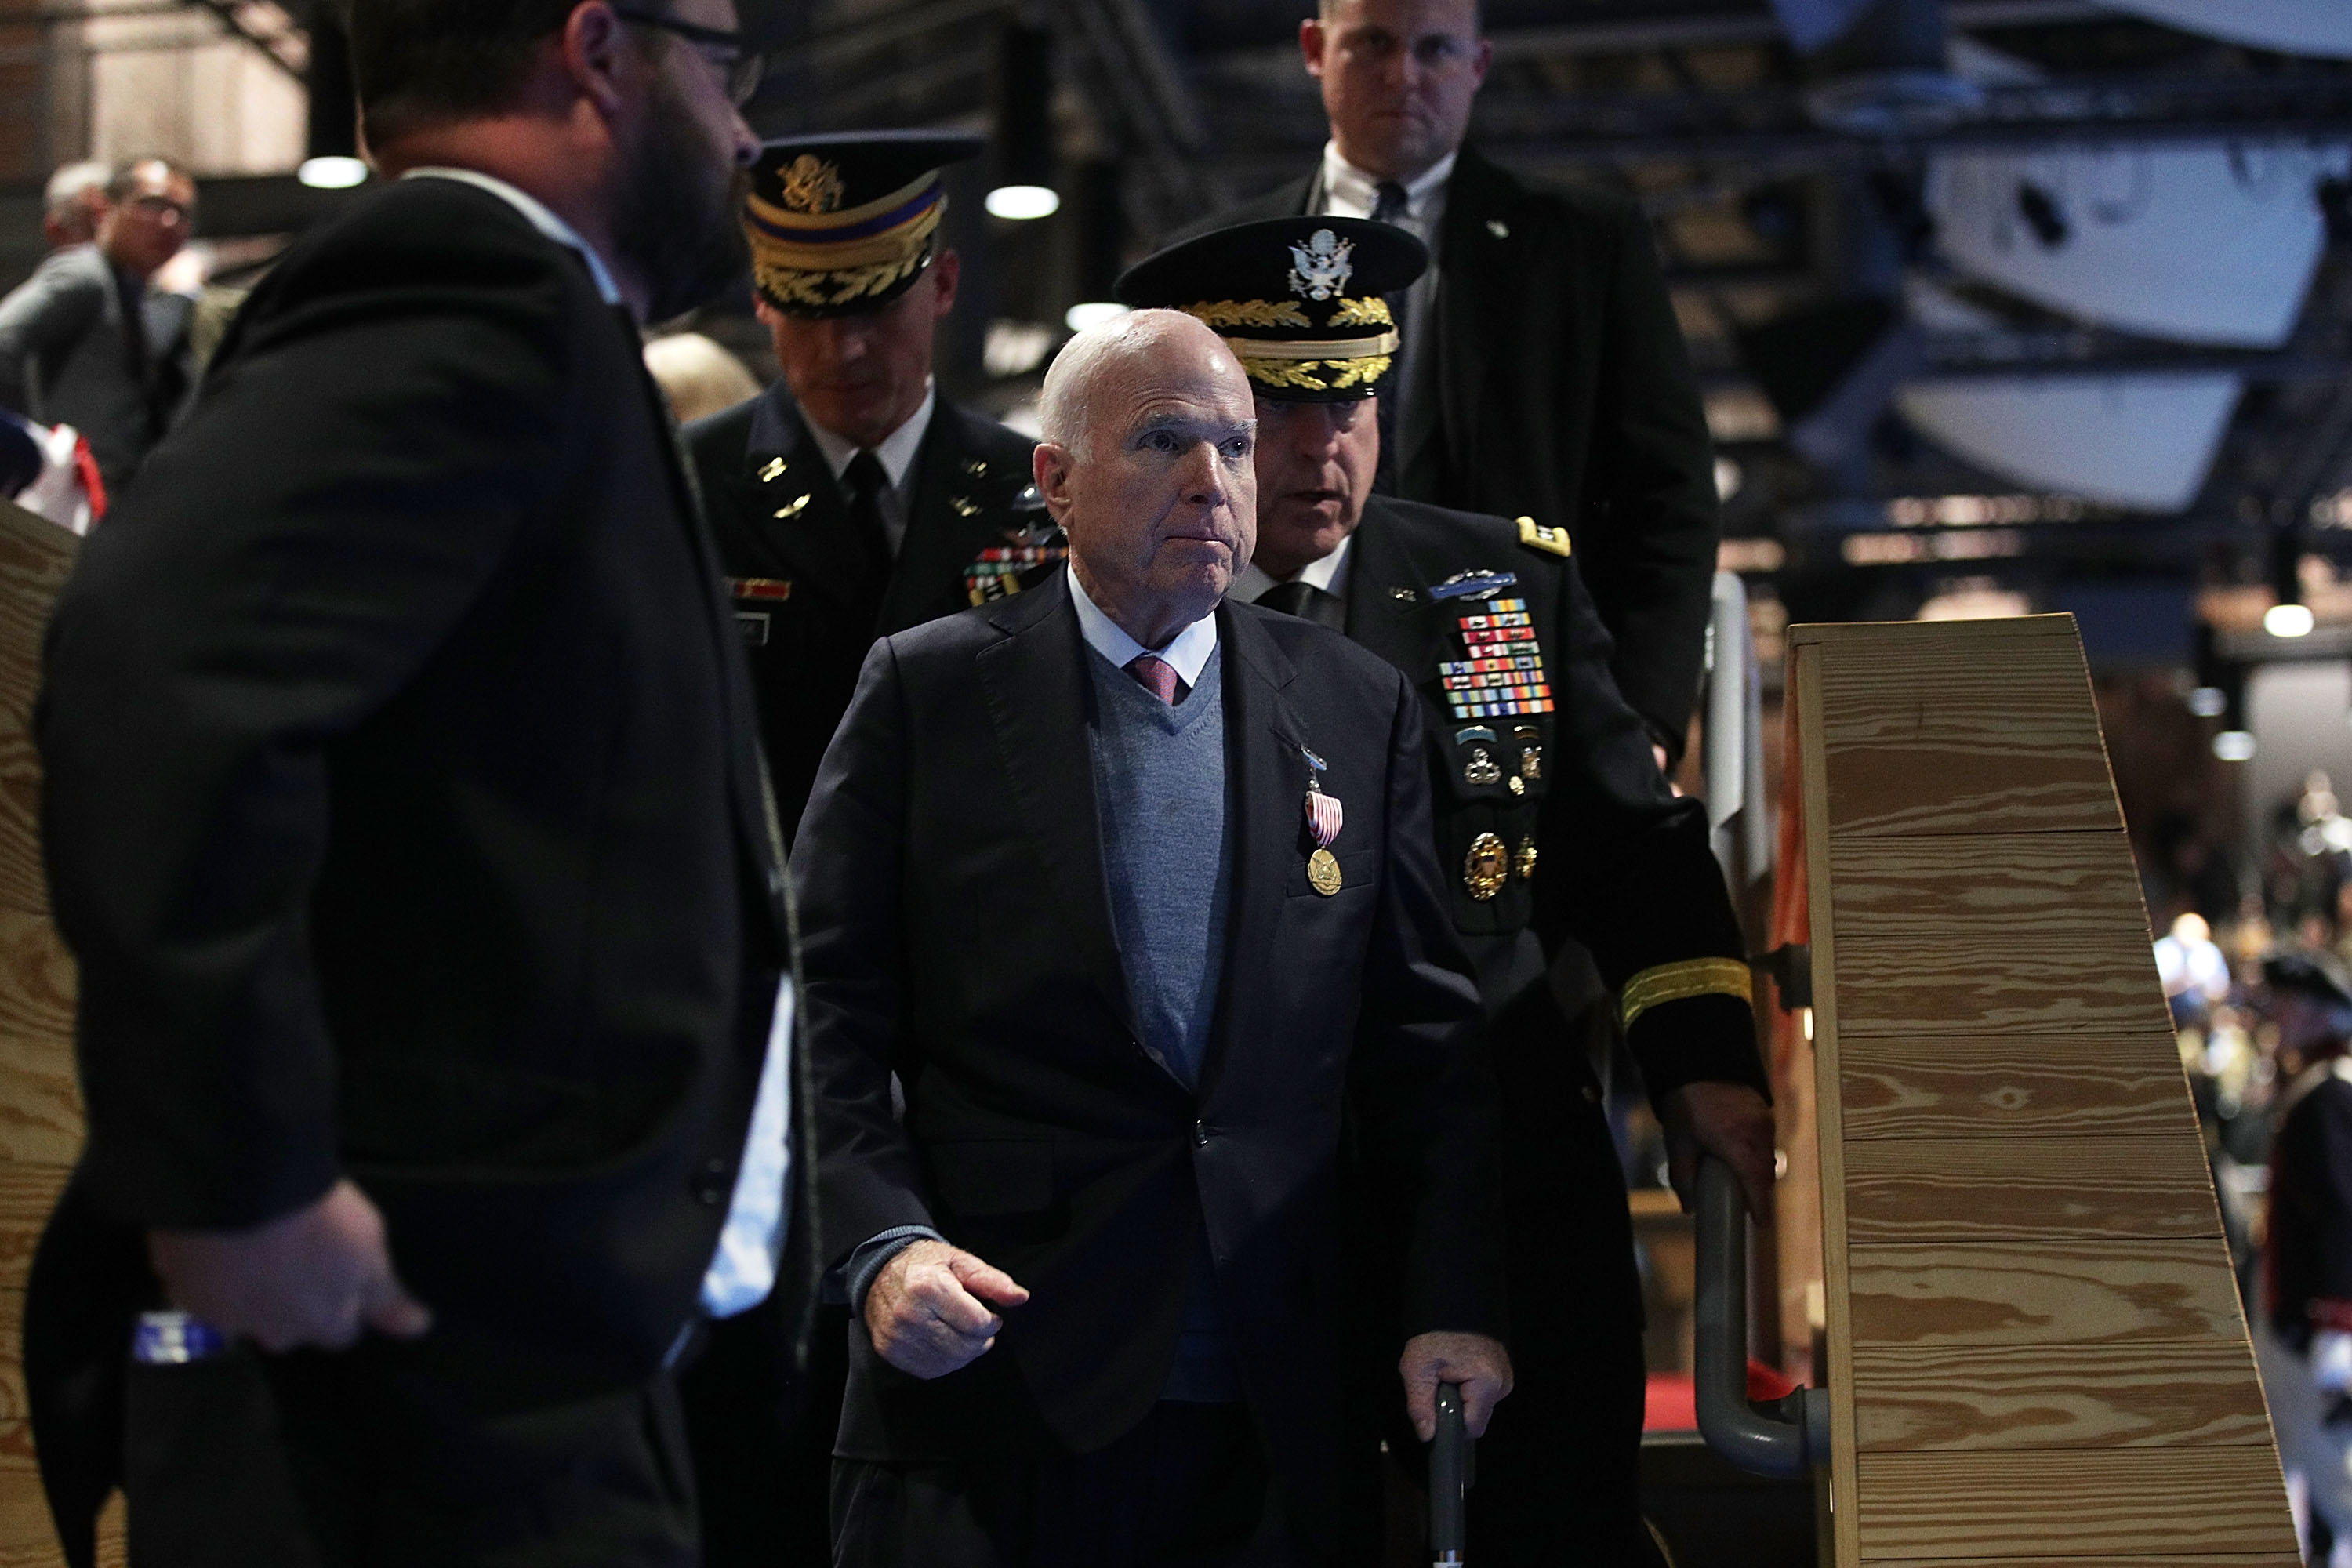 U.S. Military Holds Special Twilight Tattoo Performance In Honor Of John McCain